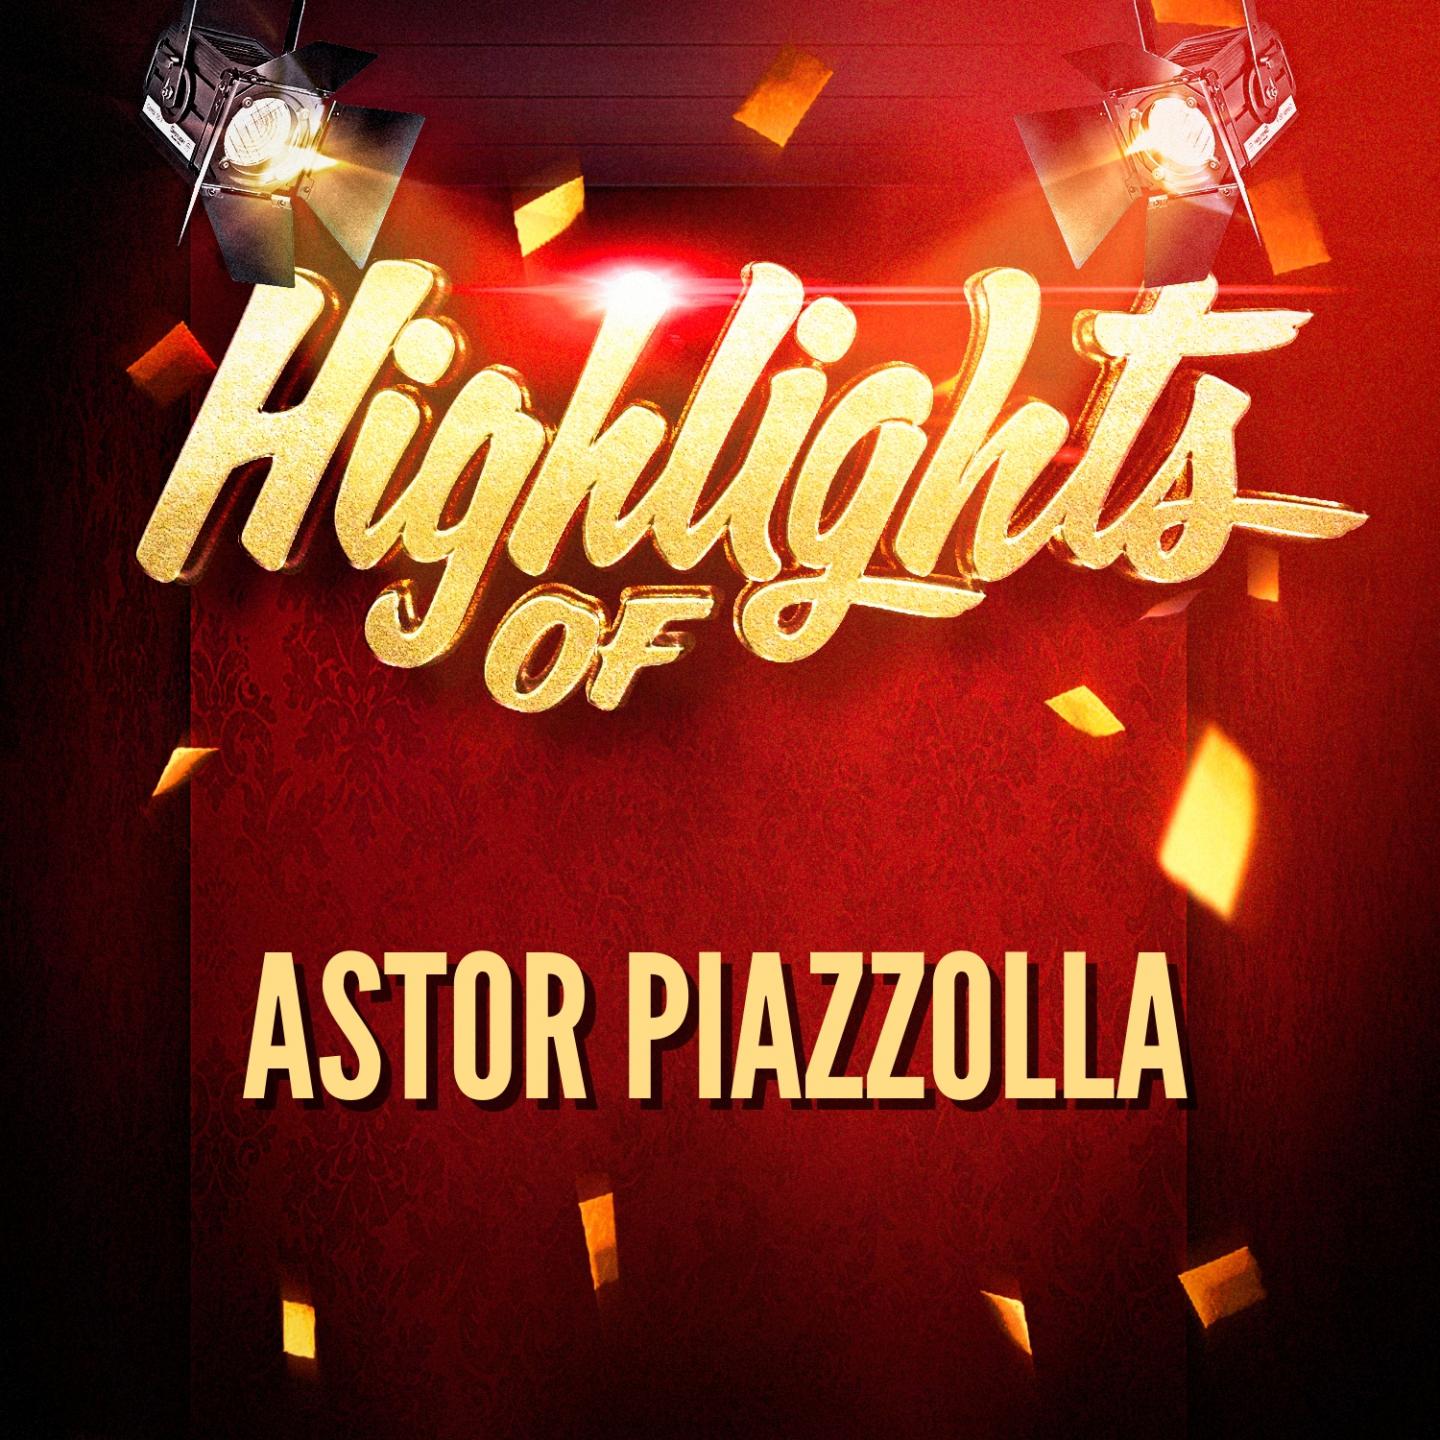 Highlights of Astor Piazzolla